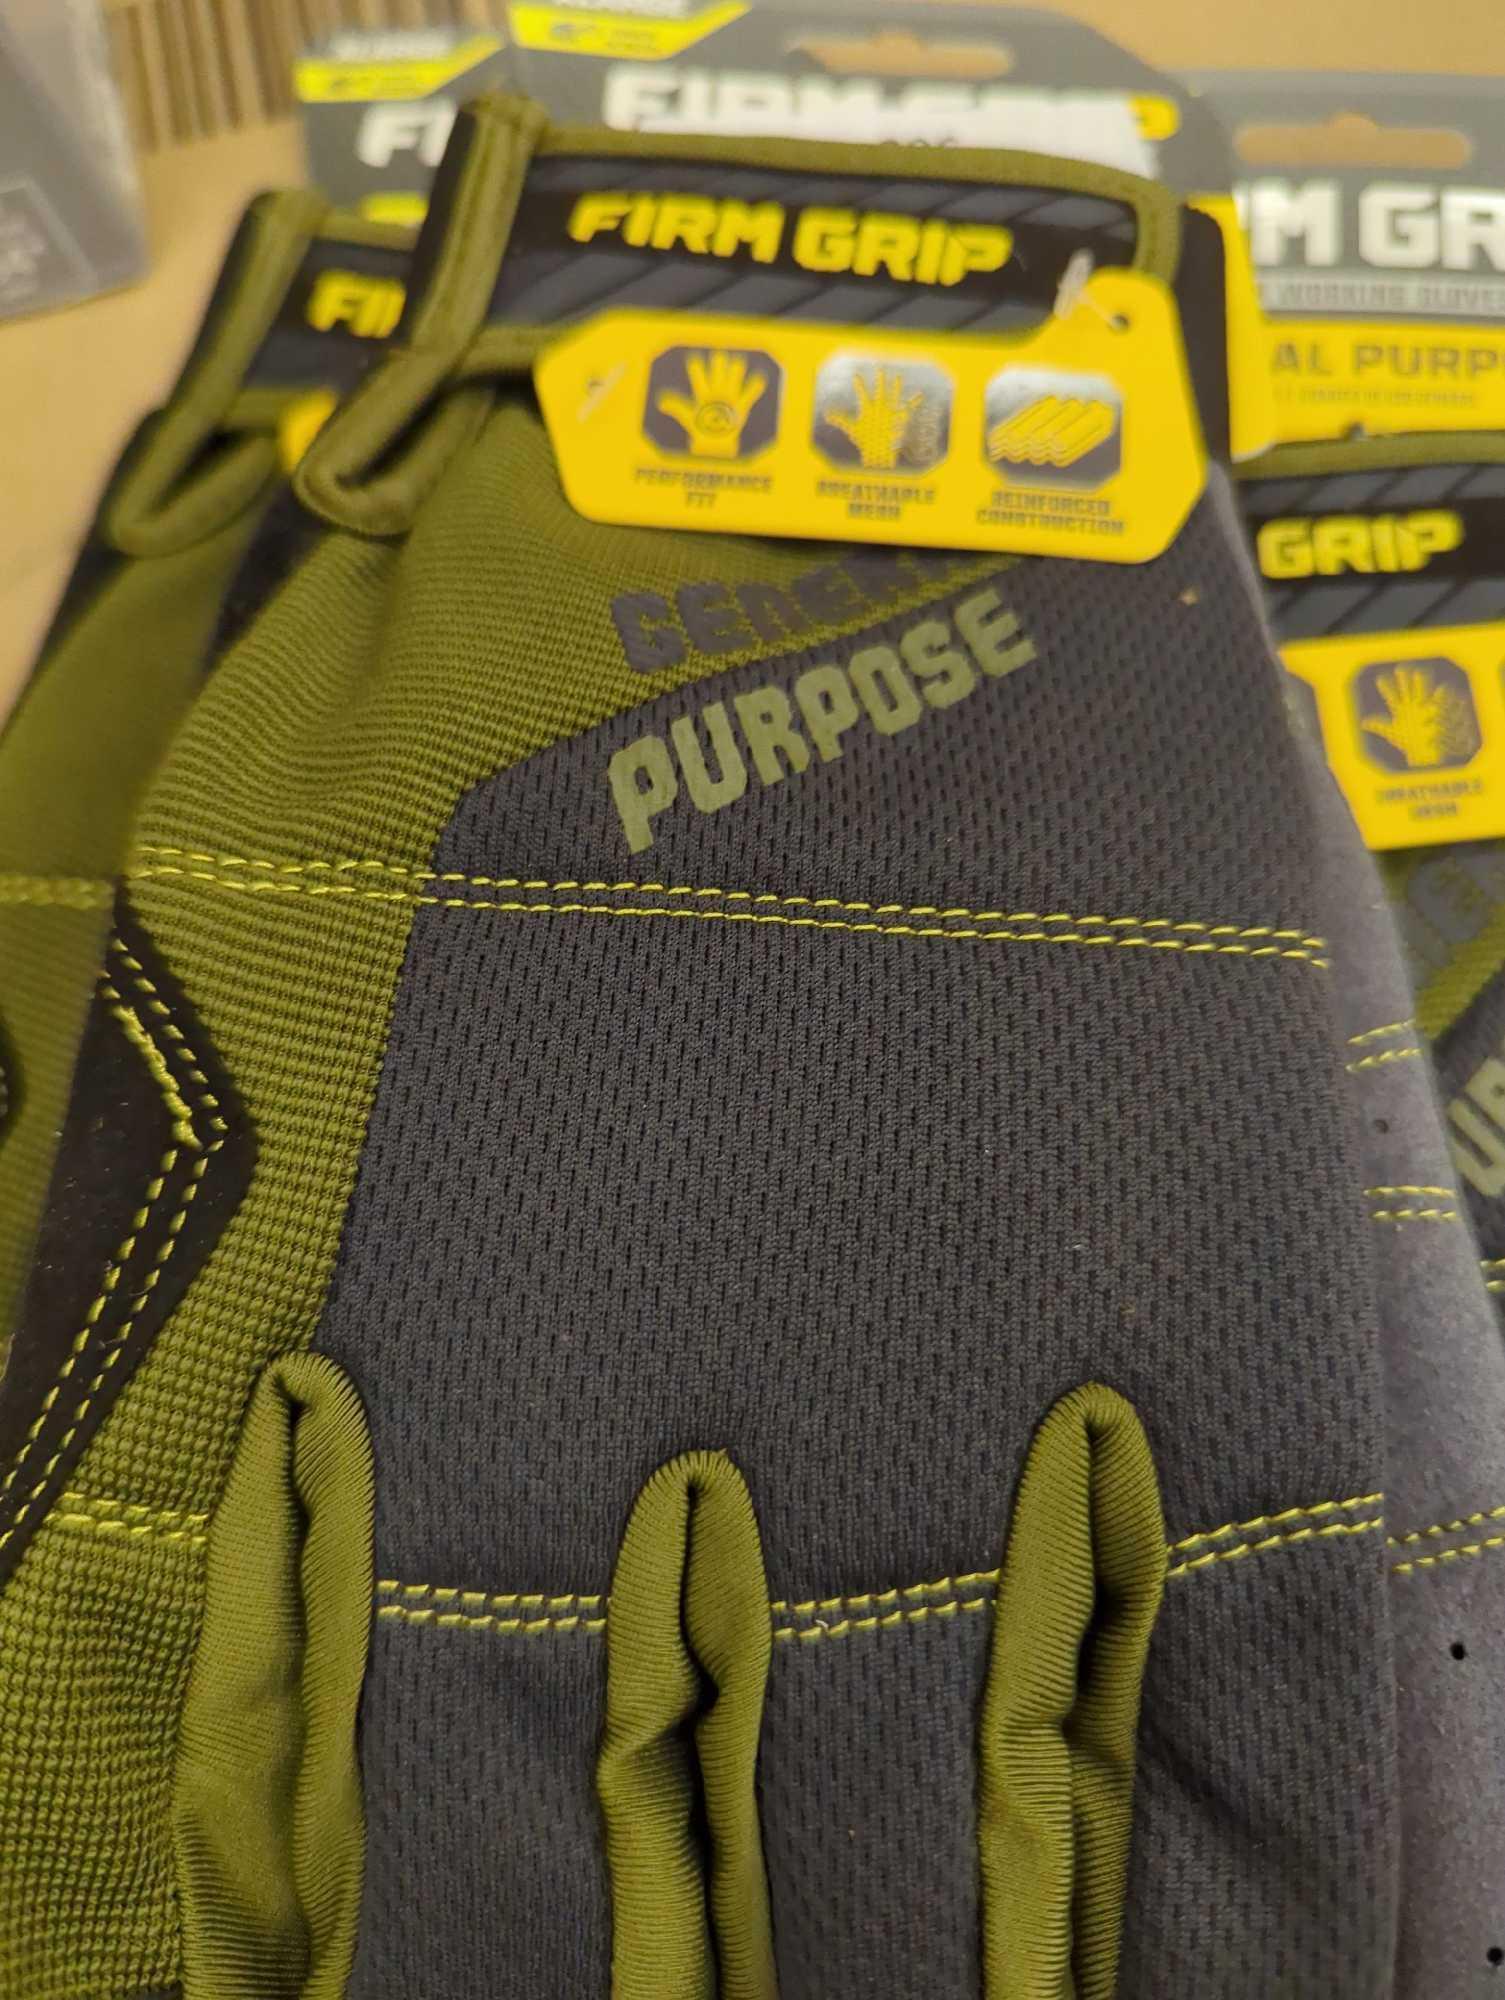 Lot of 3 Packs of FIRM GRIP General Purpose Landscape Extra Large Glove (1-Pack), Appears to be New